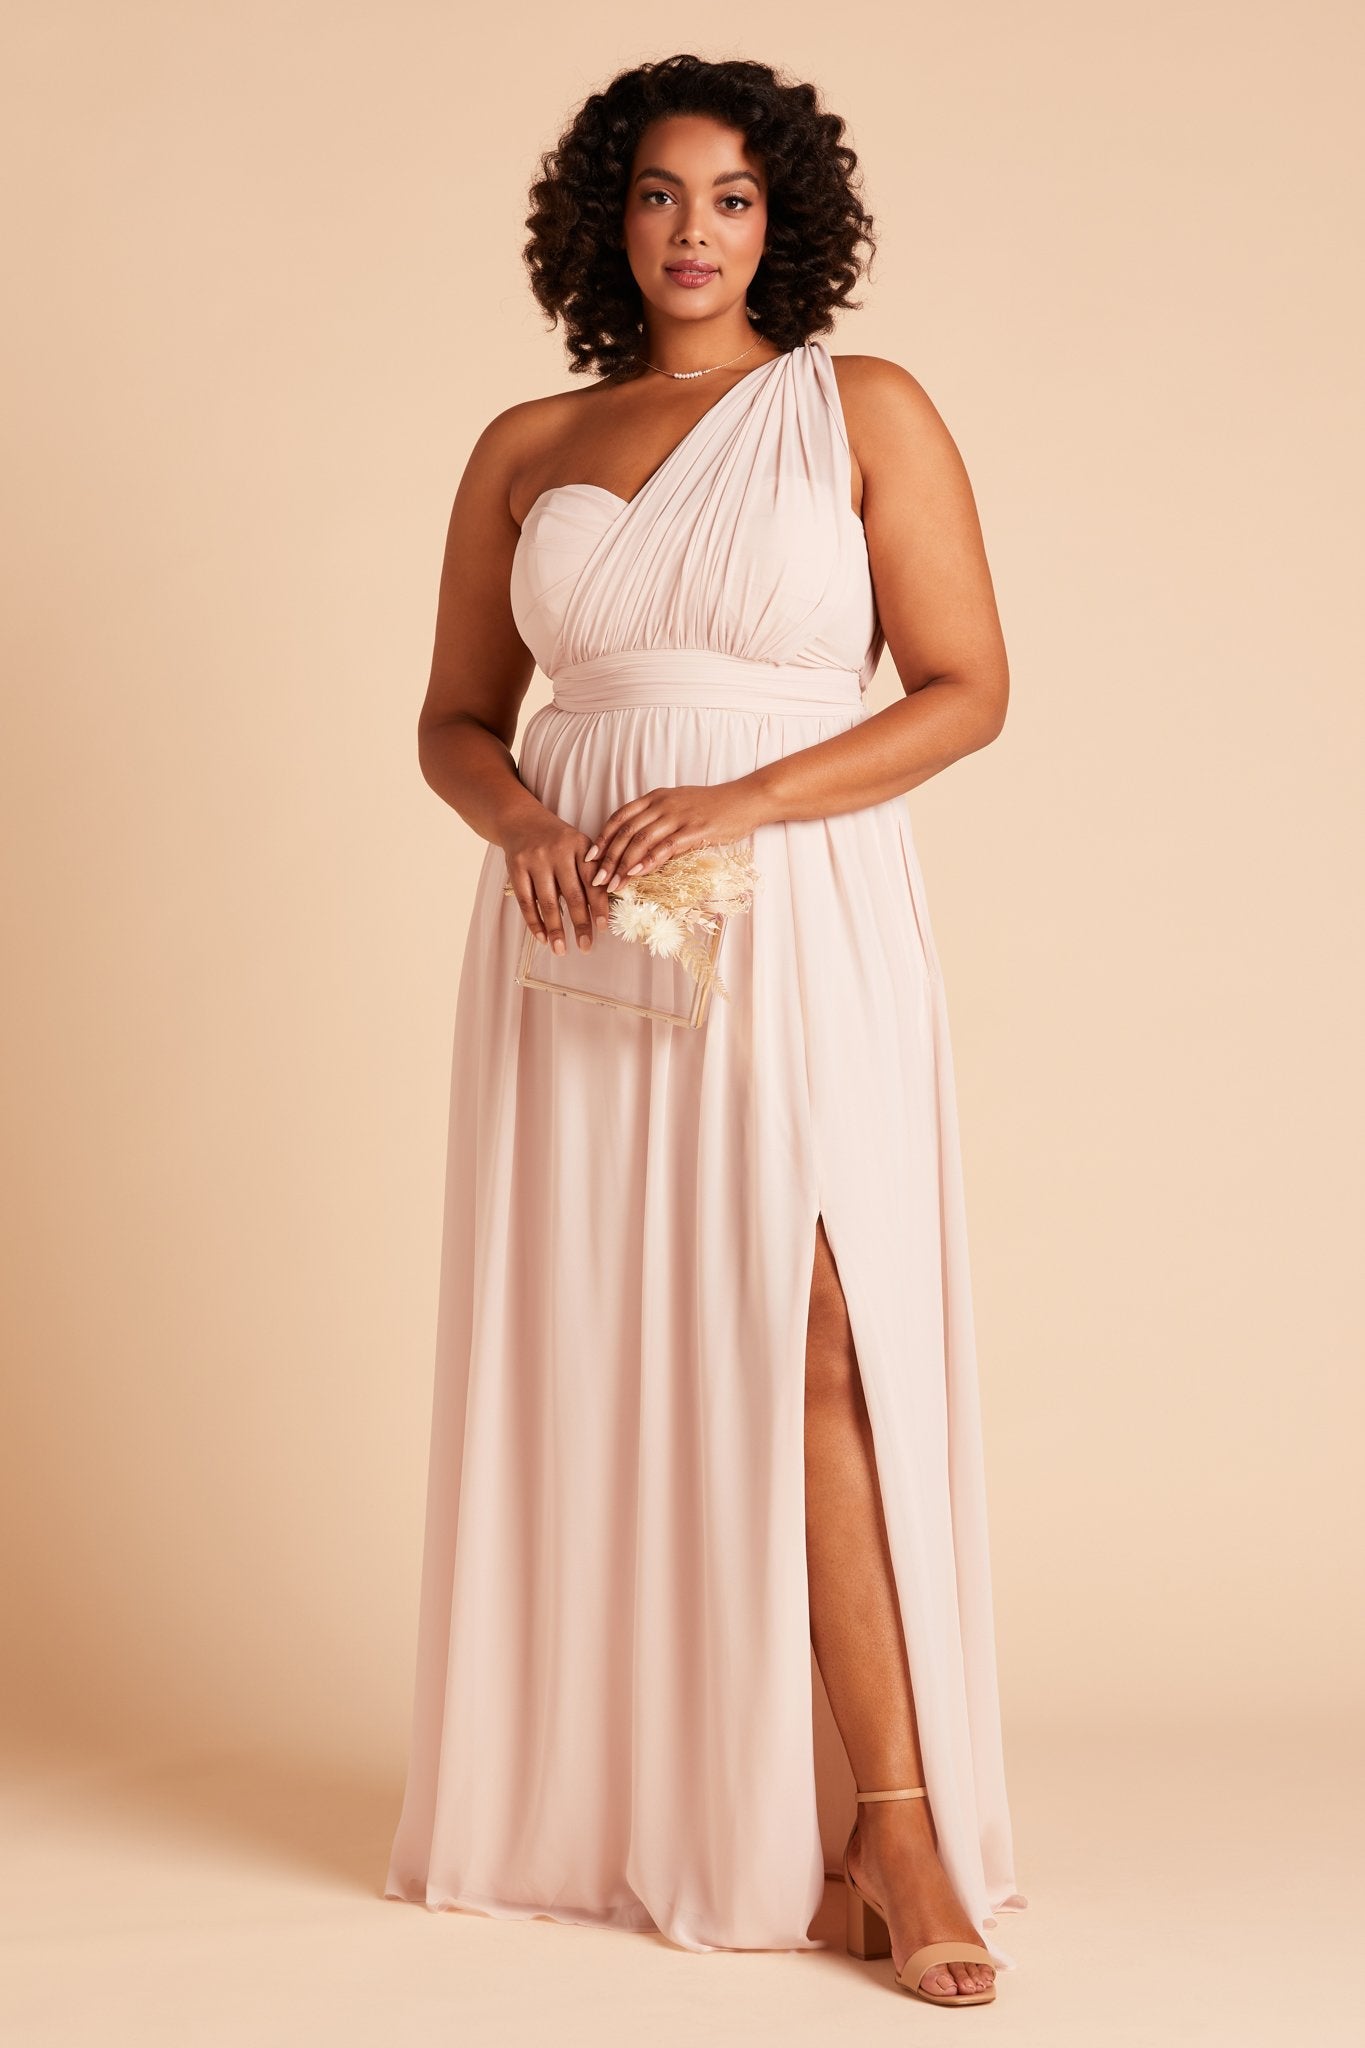 Grace convertible plus size bridesmaid dress in pale blush pink chiffon by Birdy Grey, front view